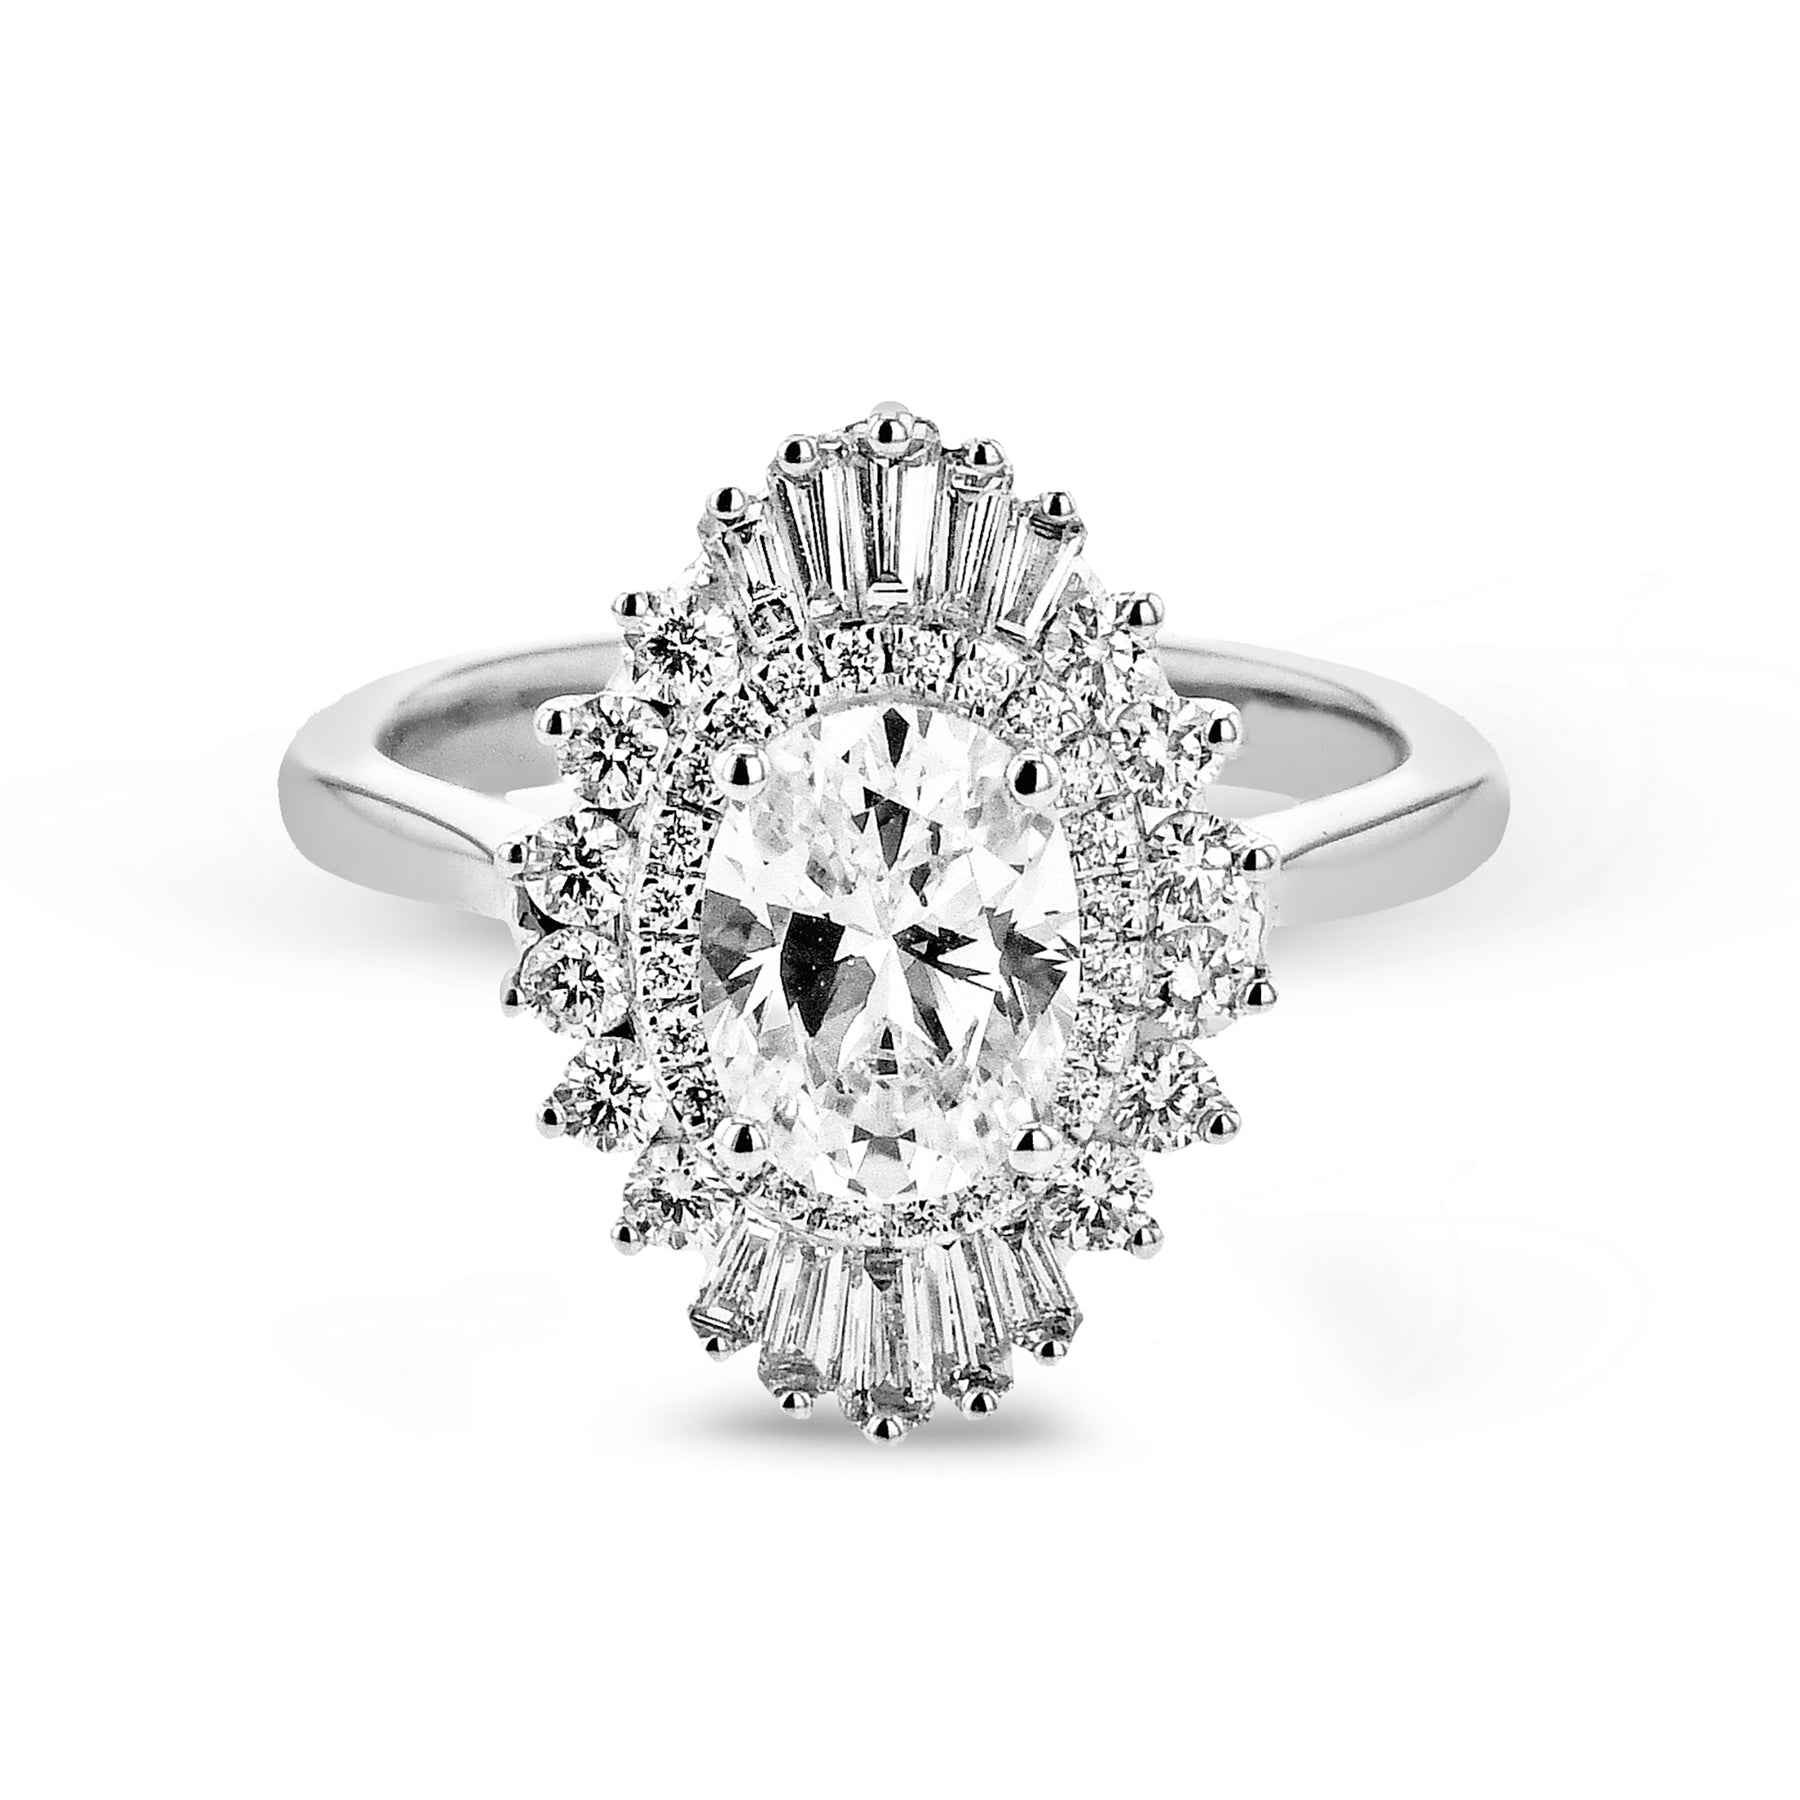 Oval-Cut Halo Engagement Ring In 18k Gold With Diamonds MR4090-OV